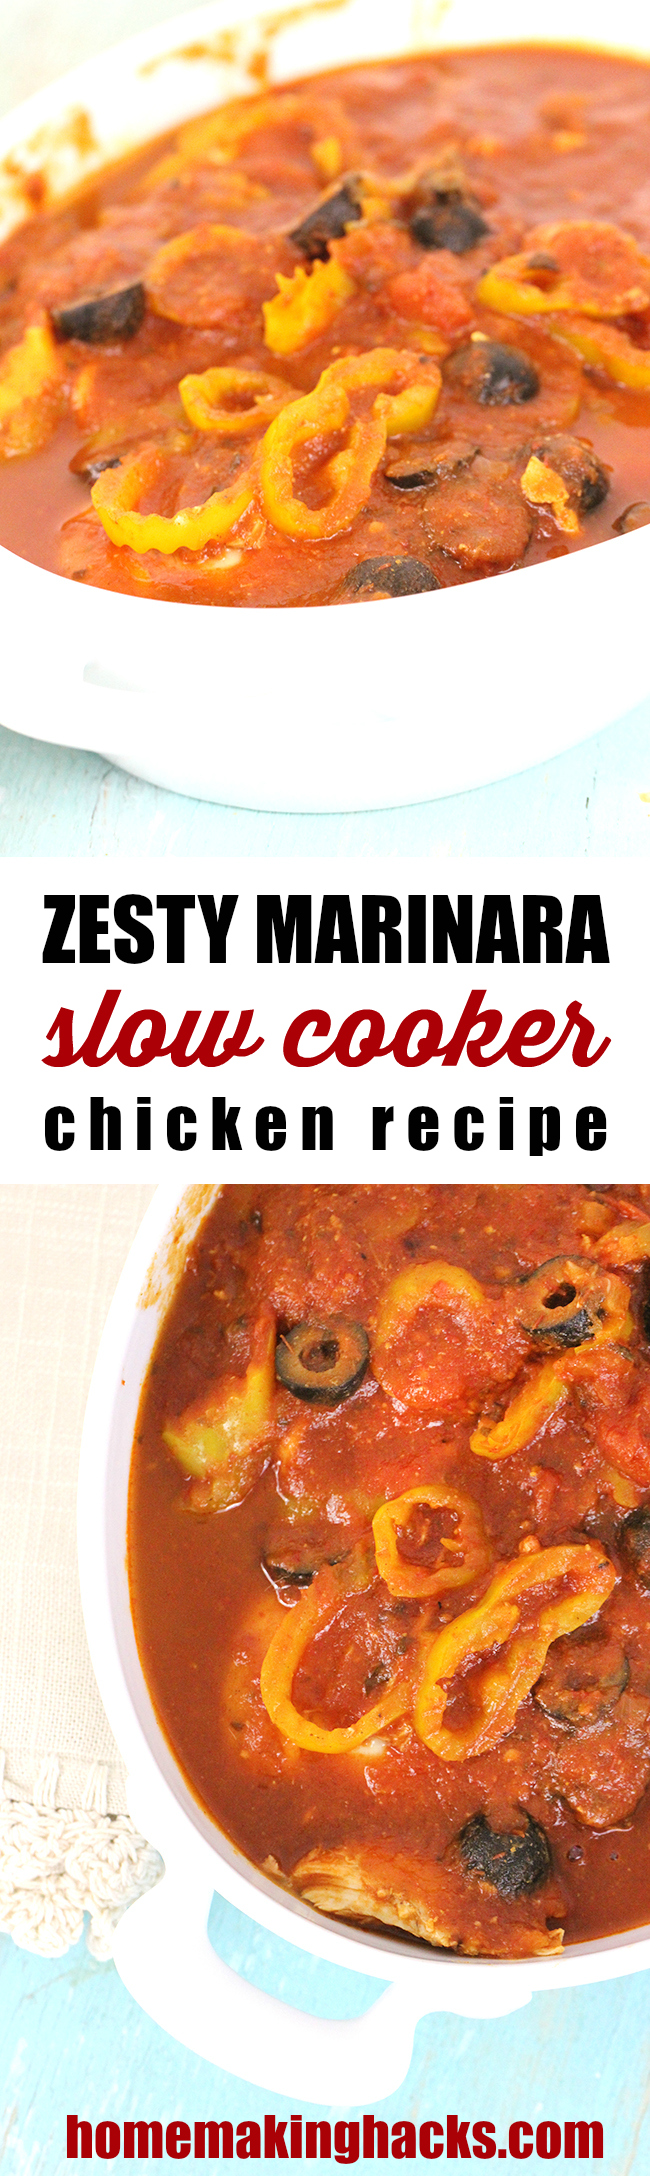 Ooh! Only 4 ingredients. Looks SO good! "zesty slow cooker chicken"